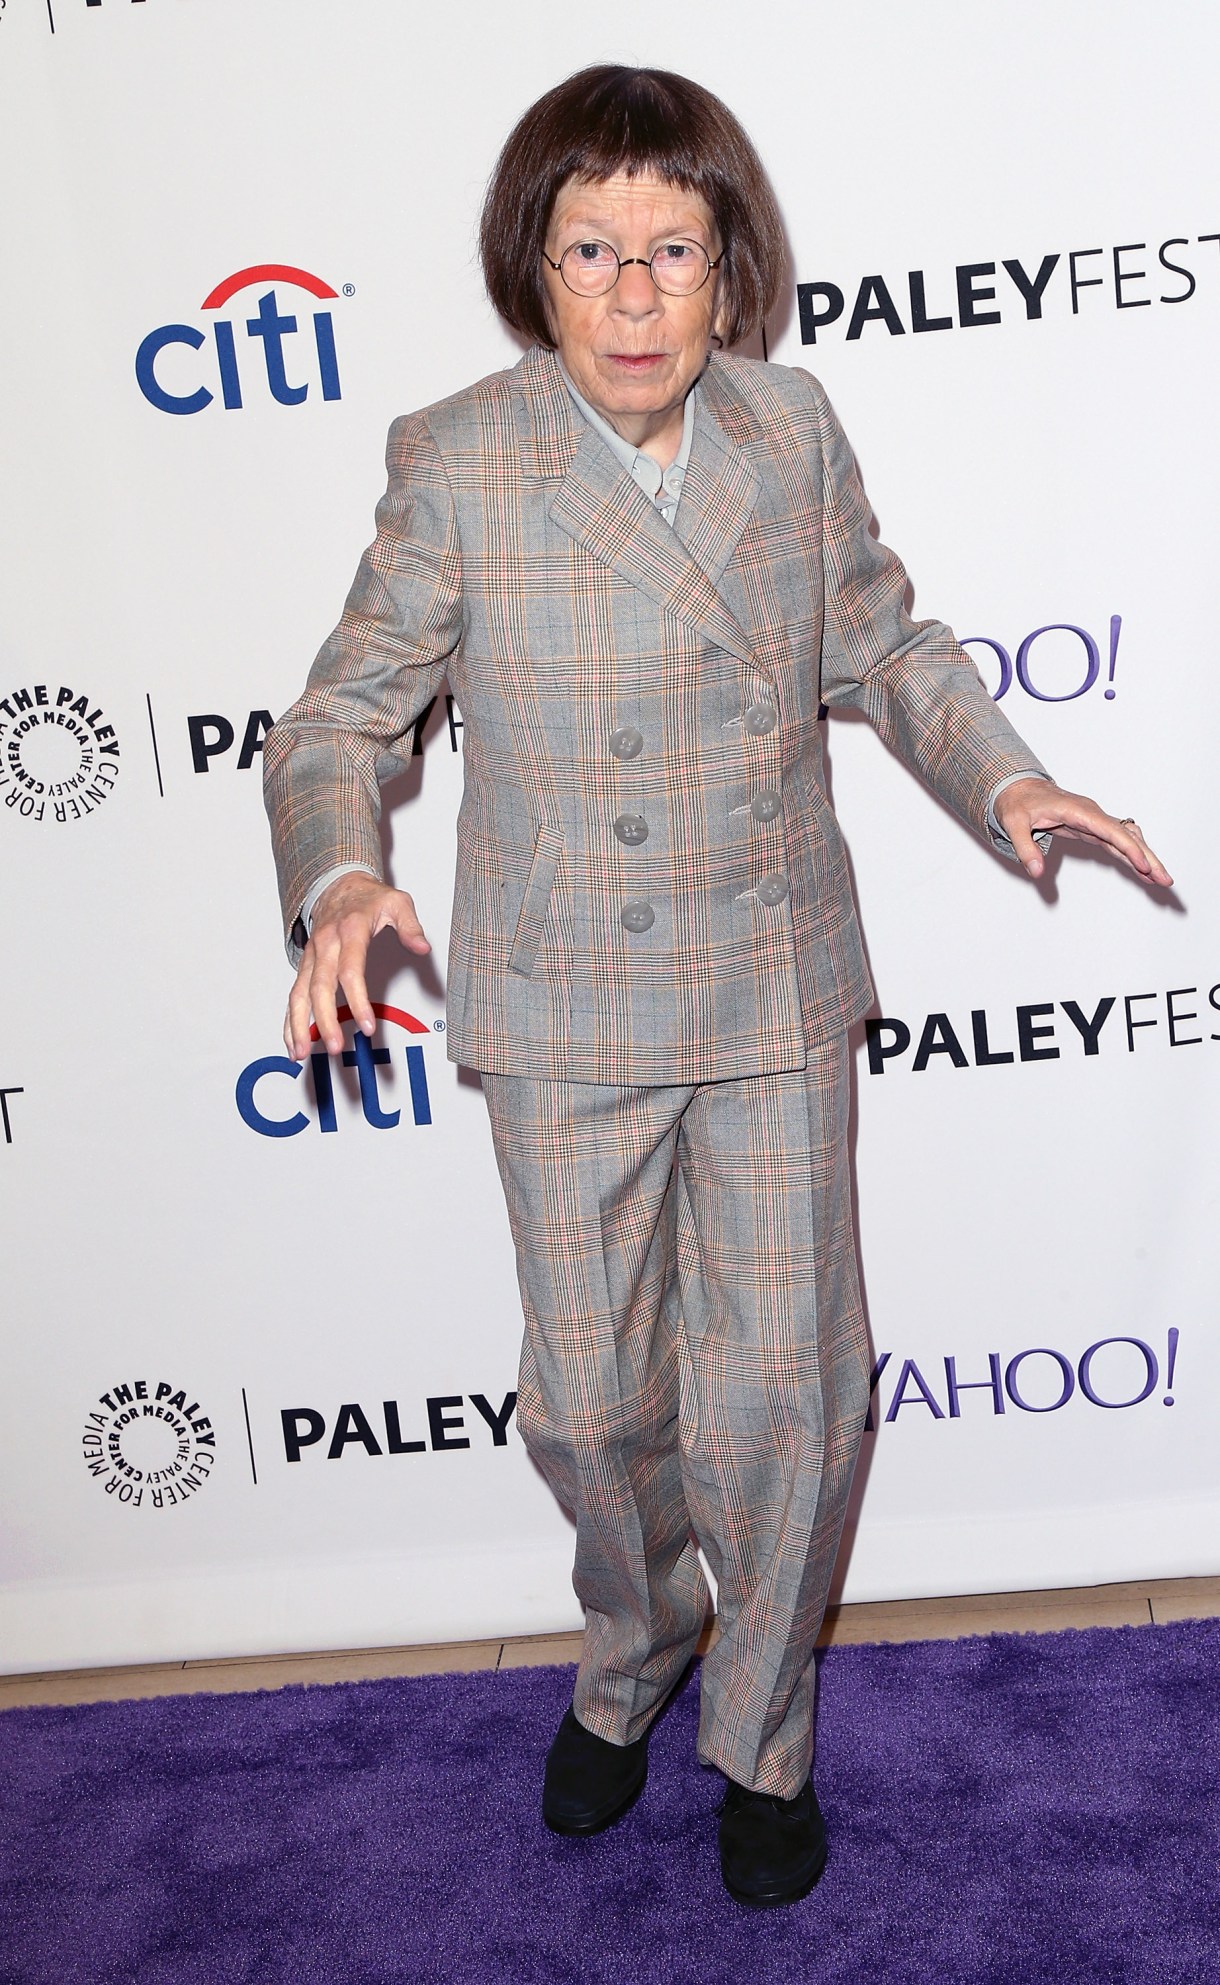 Actor Linda Hunt attends The Paley Center for Media's PaleyFest 2015 Fall TV Preview of "NCIS: Los Angeles" at The Paley Center for Media on September 11, 2015 in Beverly Hills, California.  (Photo by David Livingston/Getty Images)